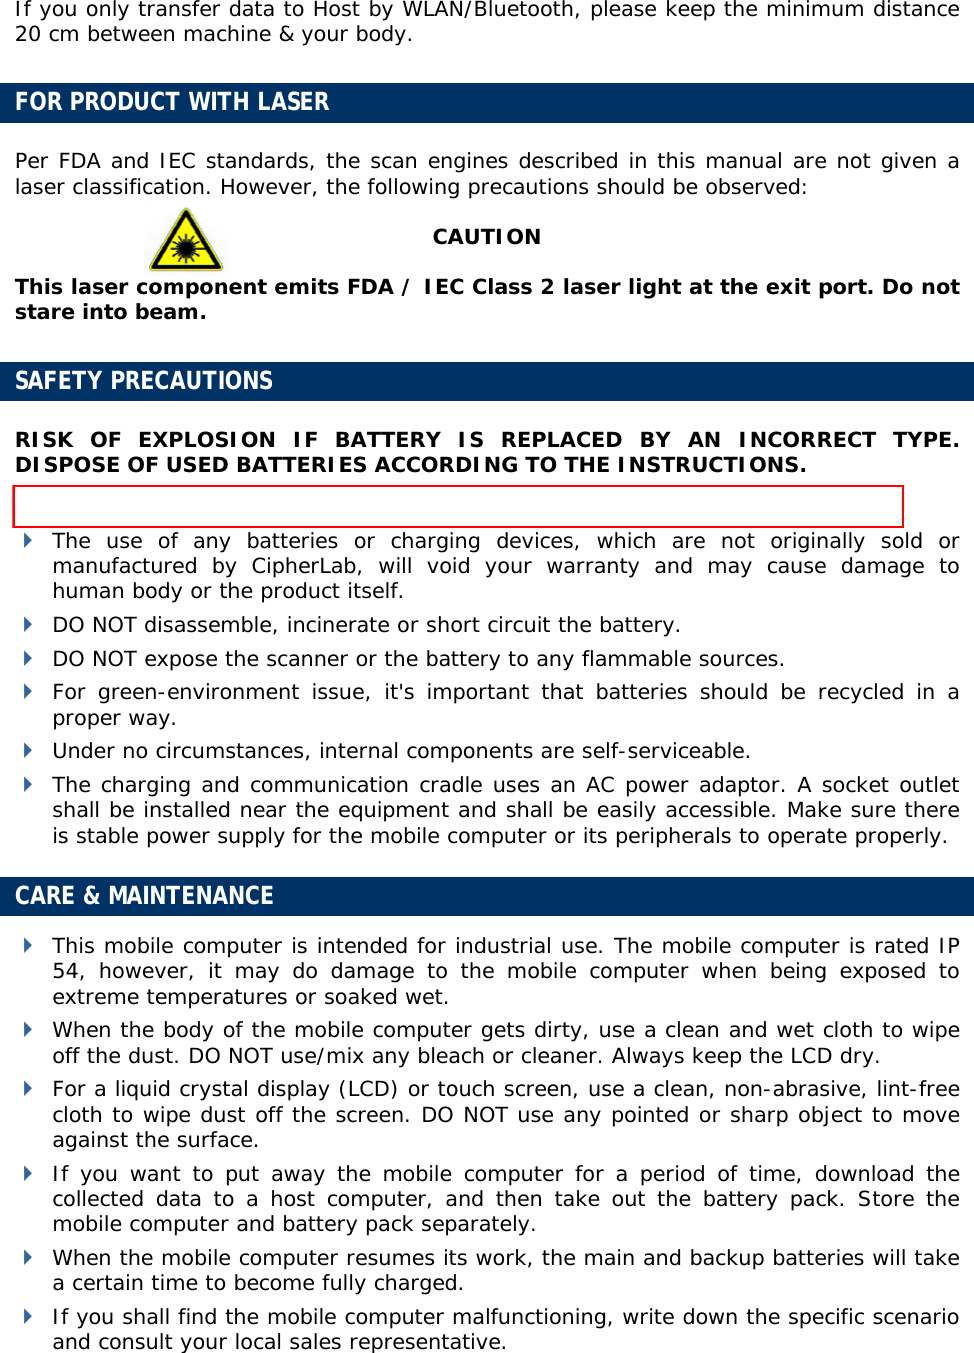  If you only transfer data to Host by WLAN/Bluetooth, please keep the minimum distance 20 cm between machine &amp; your body. FOR PRODUCT WITH LASER Per FDA and IEC standards, the scan engines described in this manual are not given a laser classification. However, the following precautions should be observed: CAUTION This laser component emits FDA / IEC Class 2 laser light at the exit port. Do not stare into beam.  SAFETY PRECAUTIONS RISK OF EXPLOSION IF BATTERY IS REPLACED BY AN INCORRECT TYPE. DISPOSE OF USED BATTERIES ACCORDING TO THE INSTRUCTIONS.  The maximum level of Specific Absorption Rate (SAR) measured is 0.211 W/kg.  The use of any batteries or charging devices, which are not originally sold or manufactured by CipherLab, will void your warranty and may cause damage to human body or the product itself.  DO NOT disassemble, incinerate or short circuit the battery.  DO NOT expose the scanner or the battery to any flammable sources.  For green-environment issue, it&apos;s important that batteries should be recycled in a proper way.   Under no circumstances, internal components are self-serviceable.  The charging and communication cradle uses an AC power adaptor. A socket outlet shall be installed near the equipment and shall be easily accessible. Make sure there is stable power supply for the mobile computer or its peripherals to operate properly. CARE &amp; MAINTENANCE  This mobile computer is intended for industrial use. The mobile computer is rated IP 54, however, it may do damage to the mobile computer when being exposed to extreme temperatures or soaked wet.  When the body of the mobile computer gets dirty, use a clean and wet cloth to wipe off the dust. DO NOT use/mix any bleach or cleaner. Always keep the LCD dry.  For a liquid crystal display (LCD) or touch screen, use a clean, non-abrasive, lint-free cloth to wipe dust off the screen. DO NOT use any pointed or sharp object to move against the surface.  If you want to put away the mobile computer for a period of time, download the collected data to a host computer, and then take out the battery pack. Store the mobile computer and battery pack separately.   When the mobile computer resumes its work, the main and backup batteries will take a certain time to become fully charged.  If you shall find the mobile computer malfunctioning, write down the specific scenario and consult your local sales representative.  